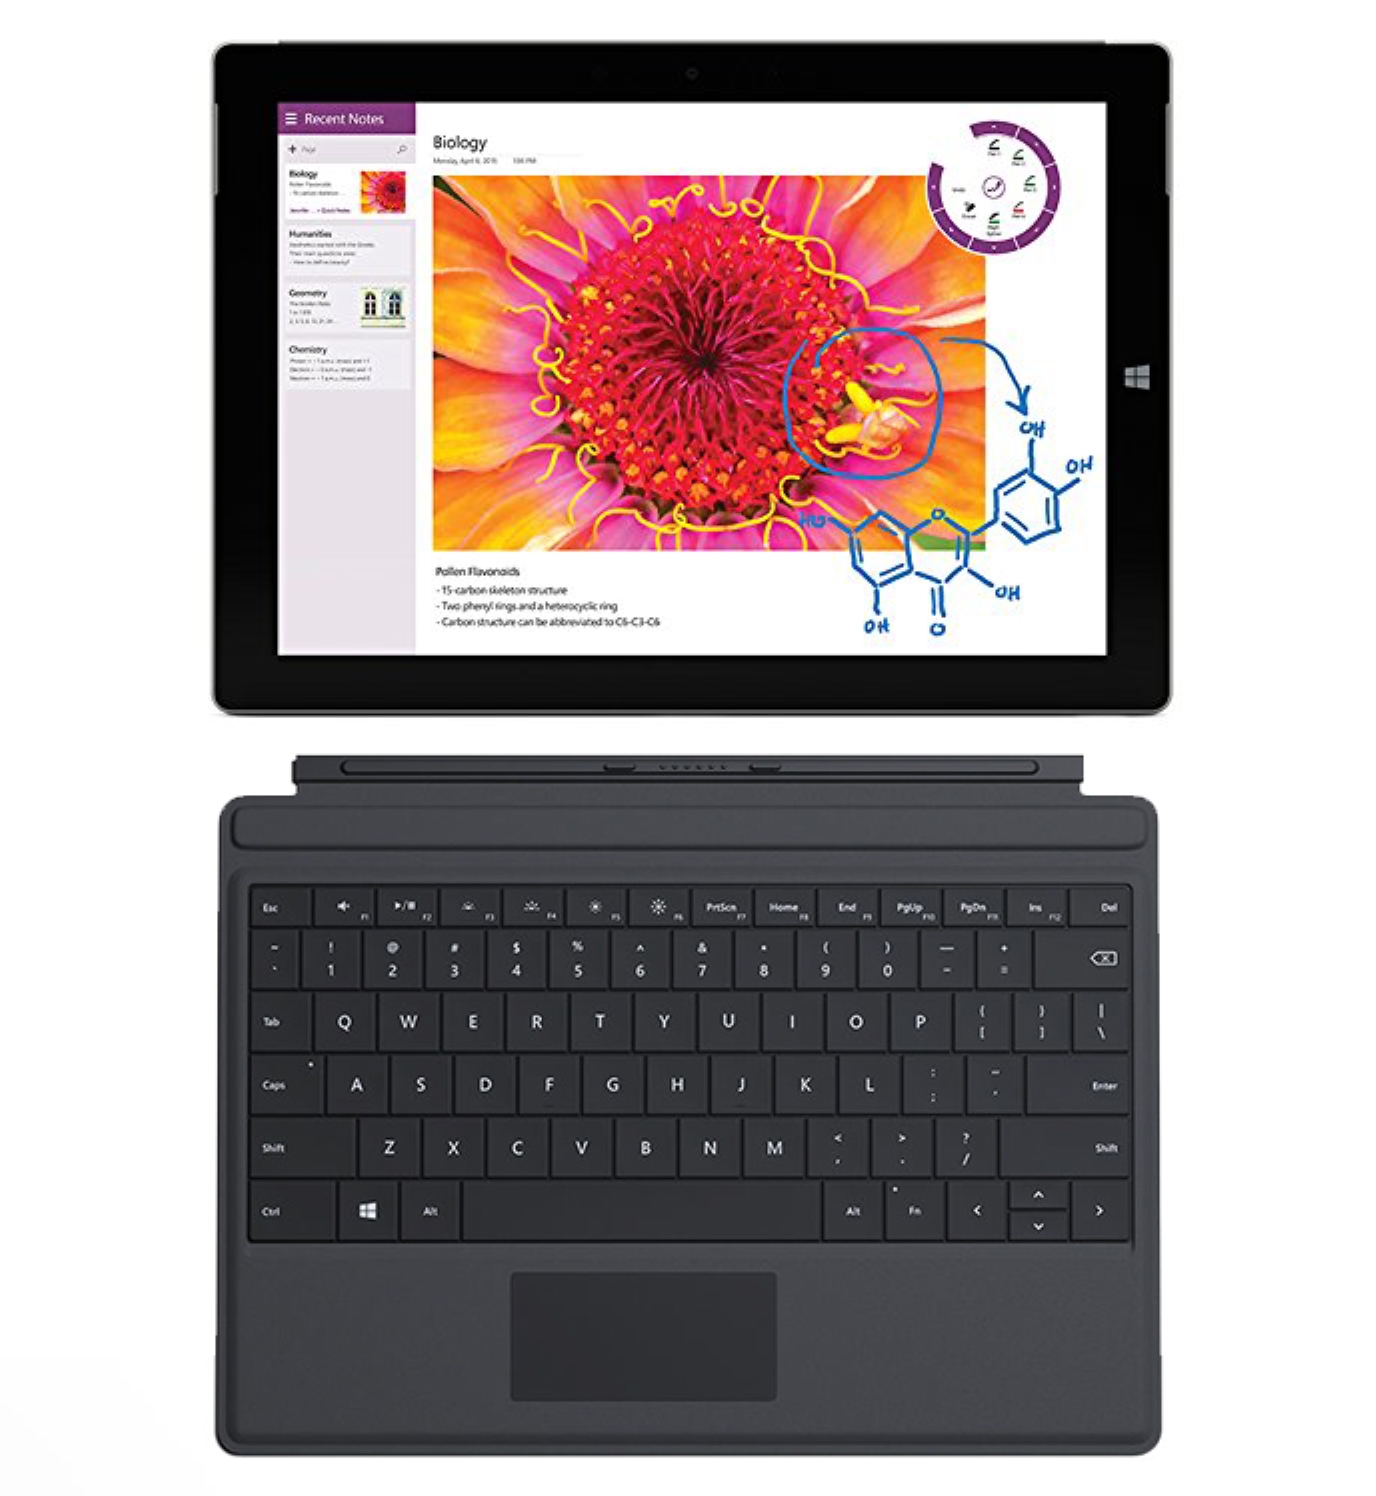 Microsoft Surface 3 10.8" Touchscreen 4GB 128GB SSD WiF i+ 4G LTE Tablet GL4-00009 with Type Cover (Used, Scratches) - image 2 of 9